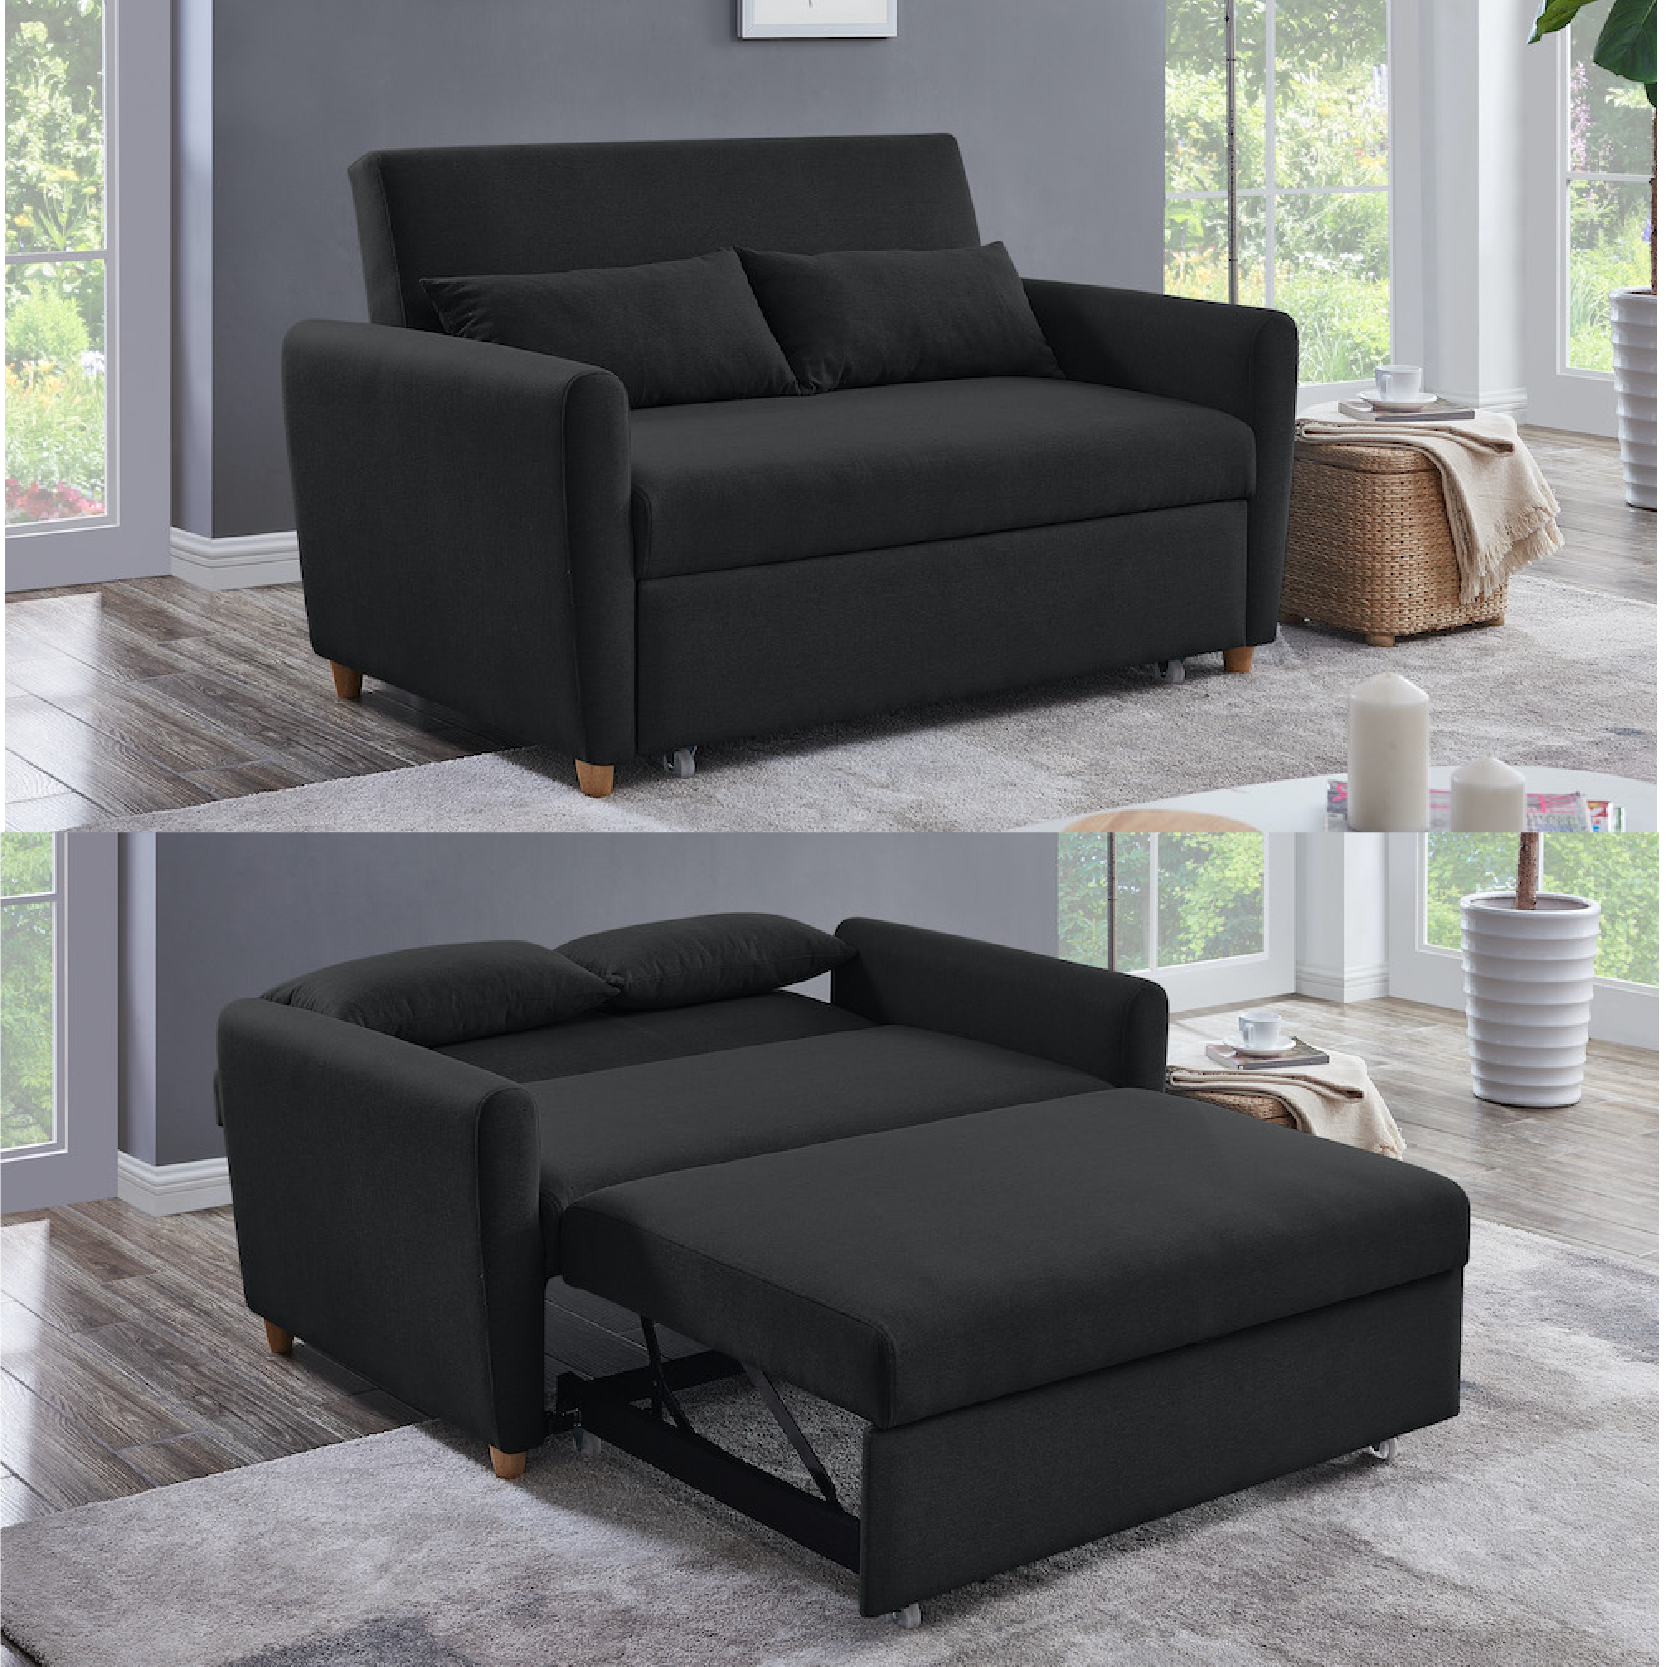 2 Seater Double Pull Out Sofa Bed